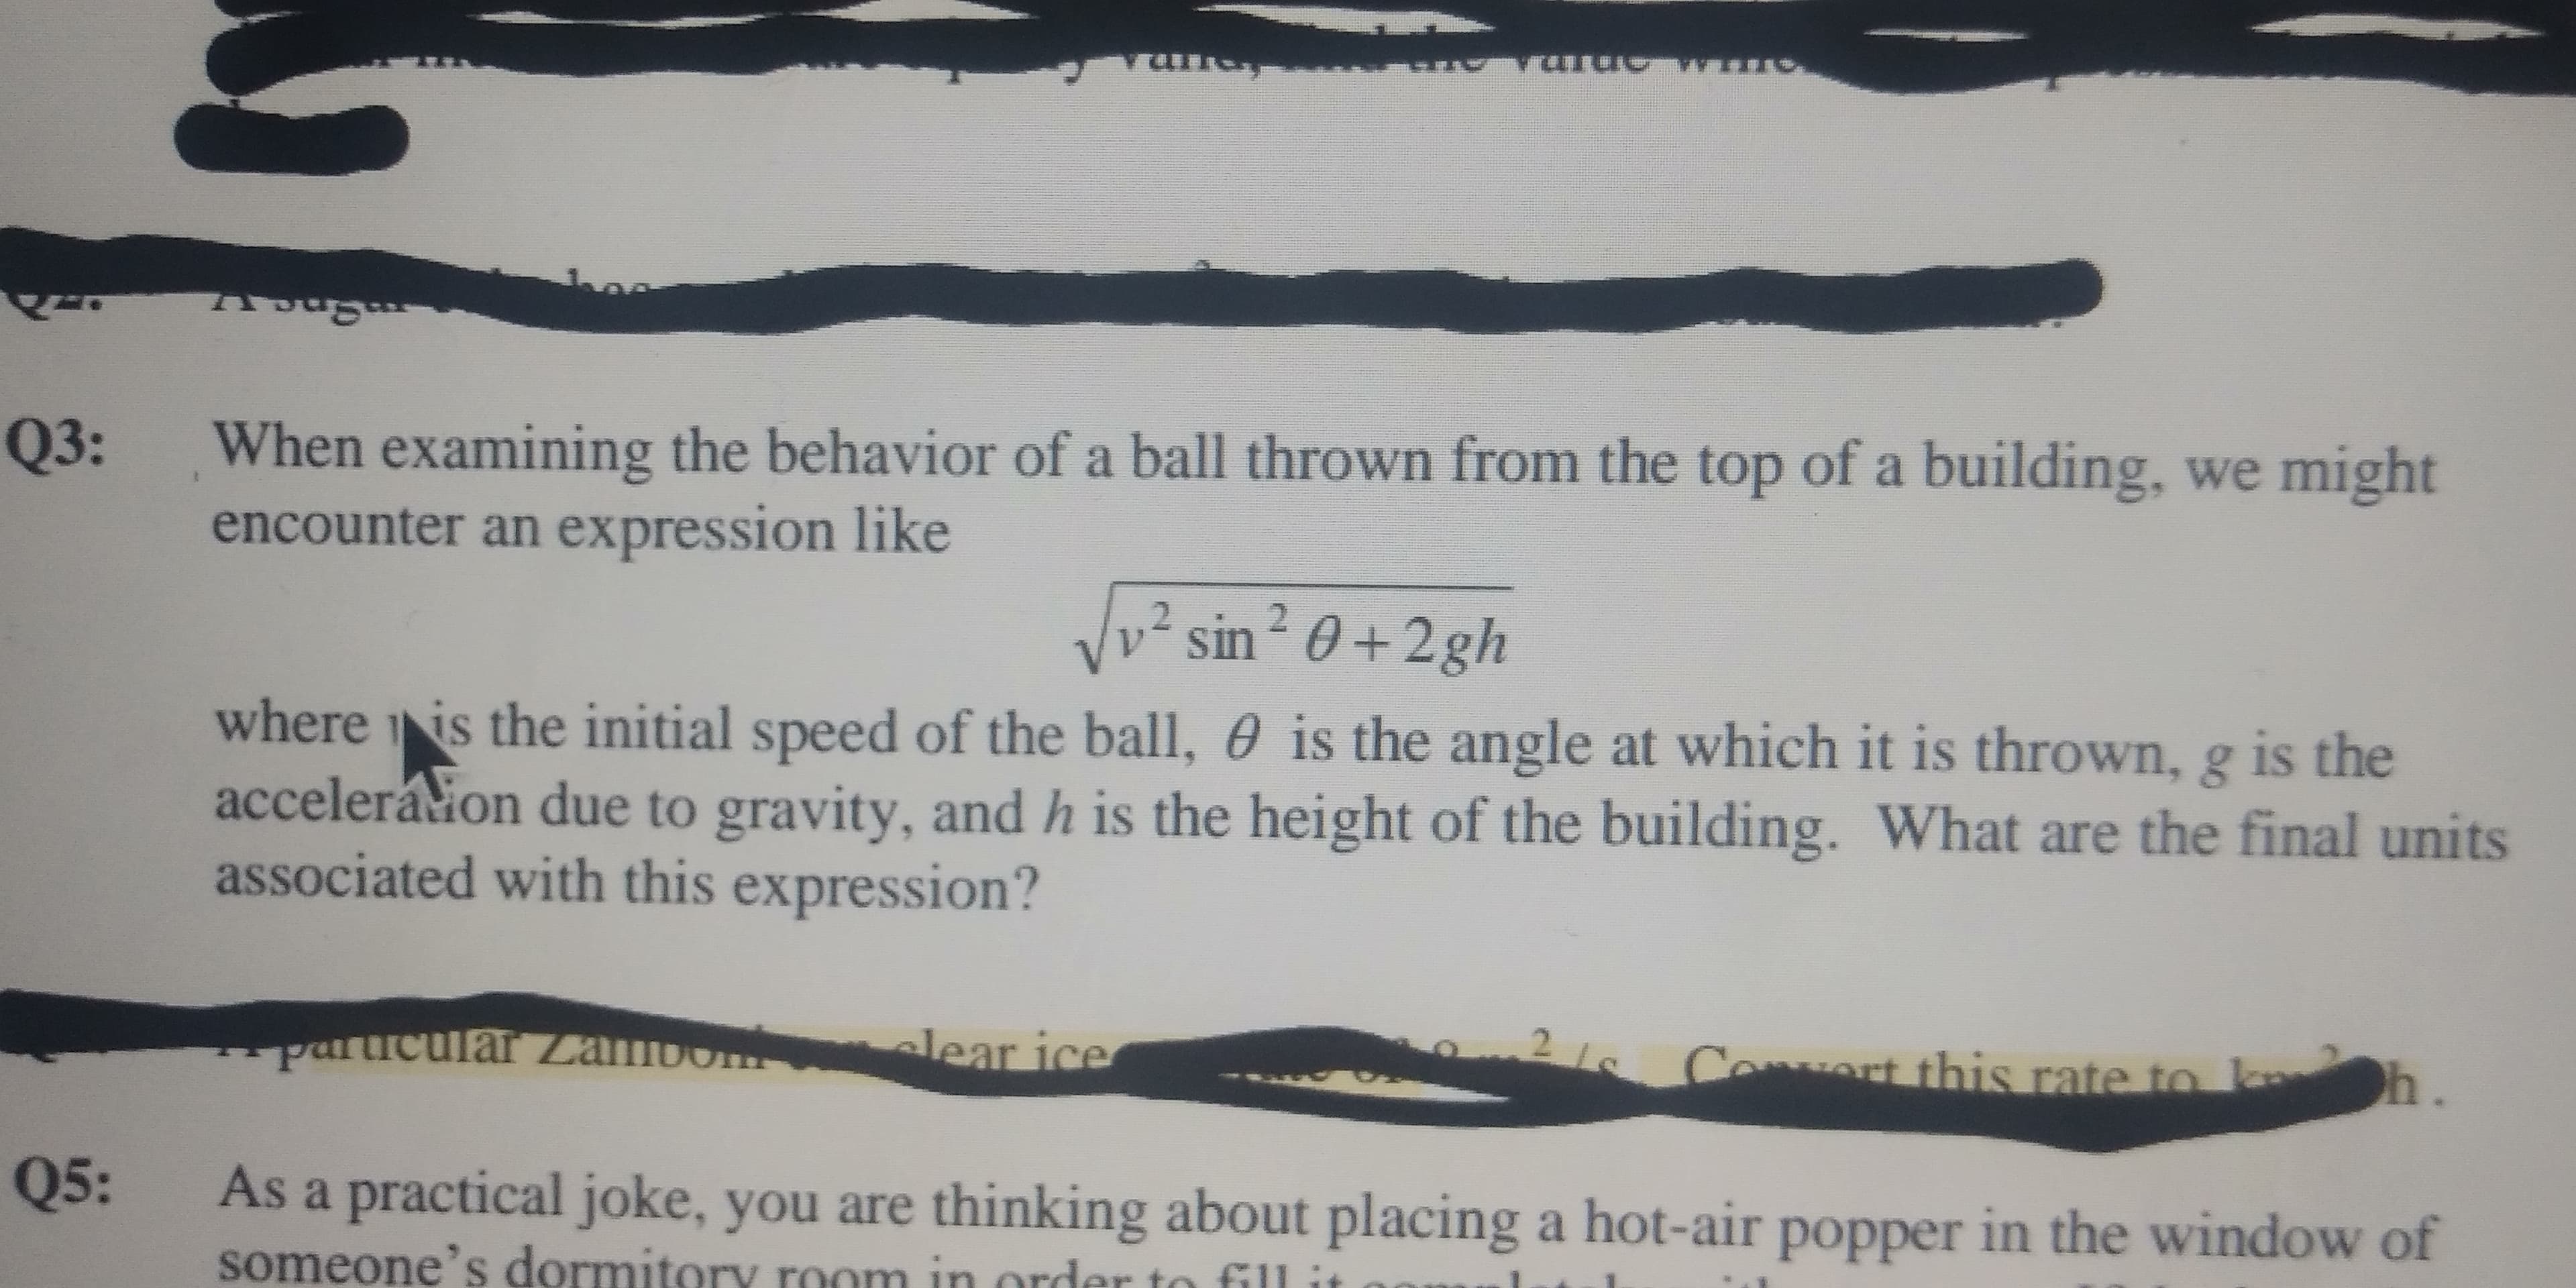 Q3:
When examining the behavior of a ball thrown from the top of a building, we might
encounter an expression like
Vv² sin² 0 +2gh
UIS
where is the initial speed of the ball, 0 is the angle at which it is thrown, g is the
accelerátion due to gravity, and h is the height of the building. What are the final units
associated with this expression?
particular Zambom
elear ice
Coert this rate to
h.
Q5:
As a practical joke, you are thinking about placing a hot-air popper in the window of
parucular Zambom
someone's dorn
